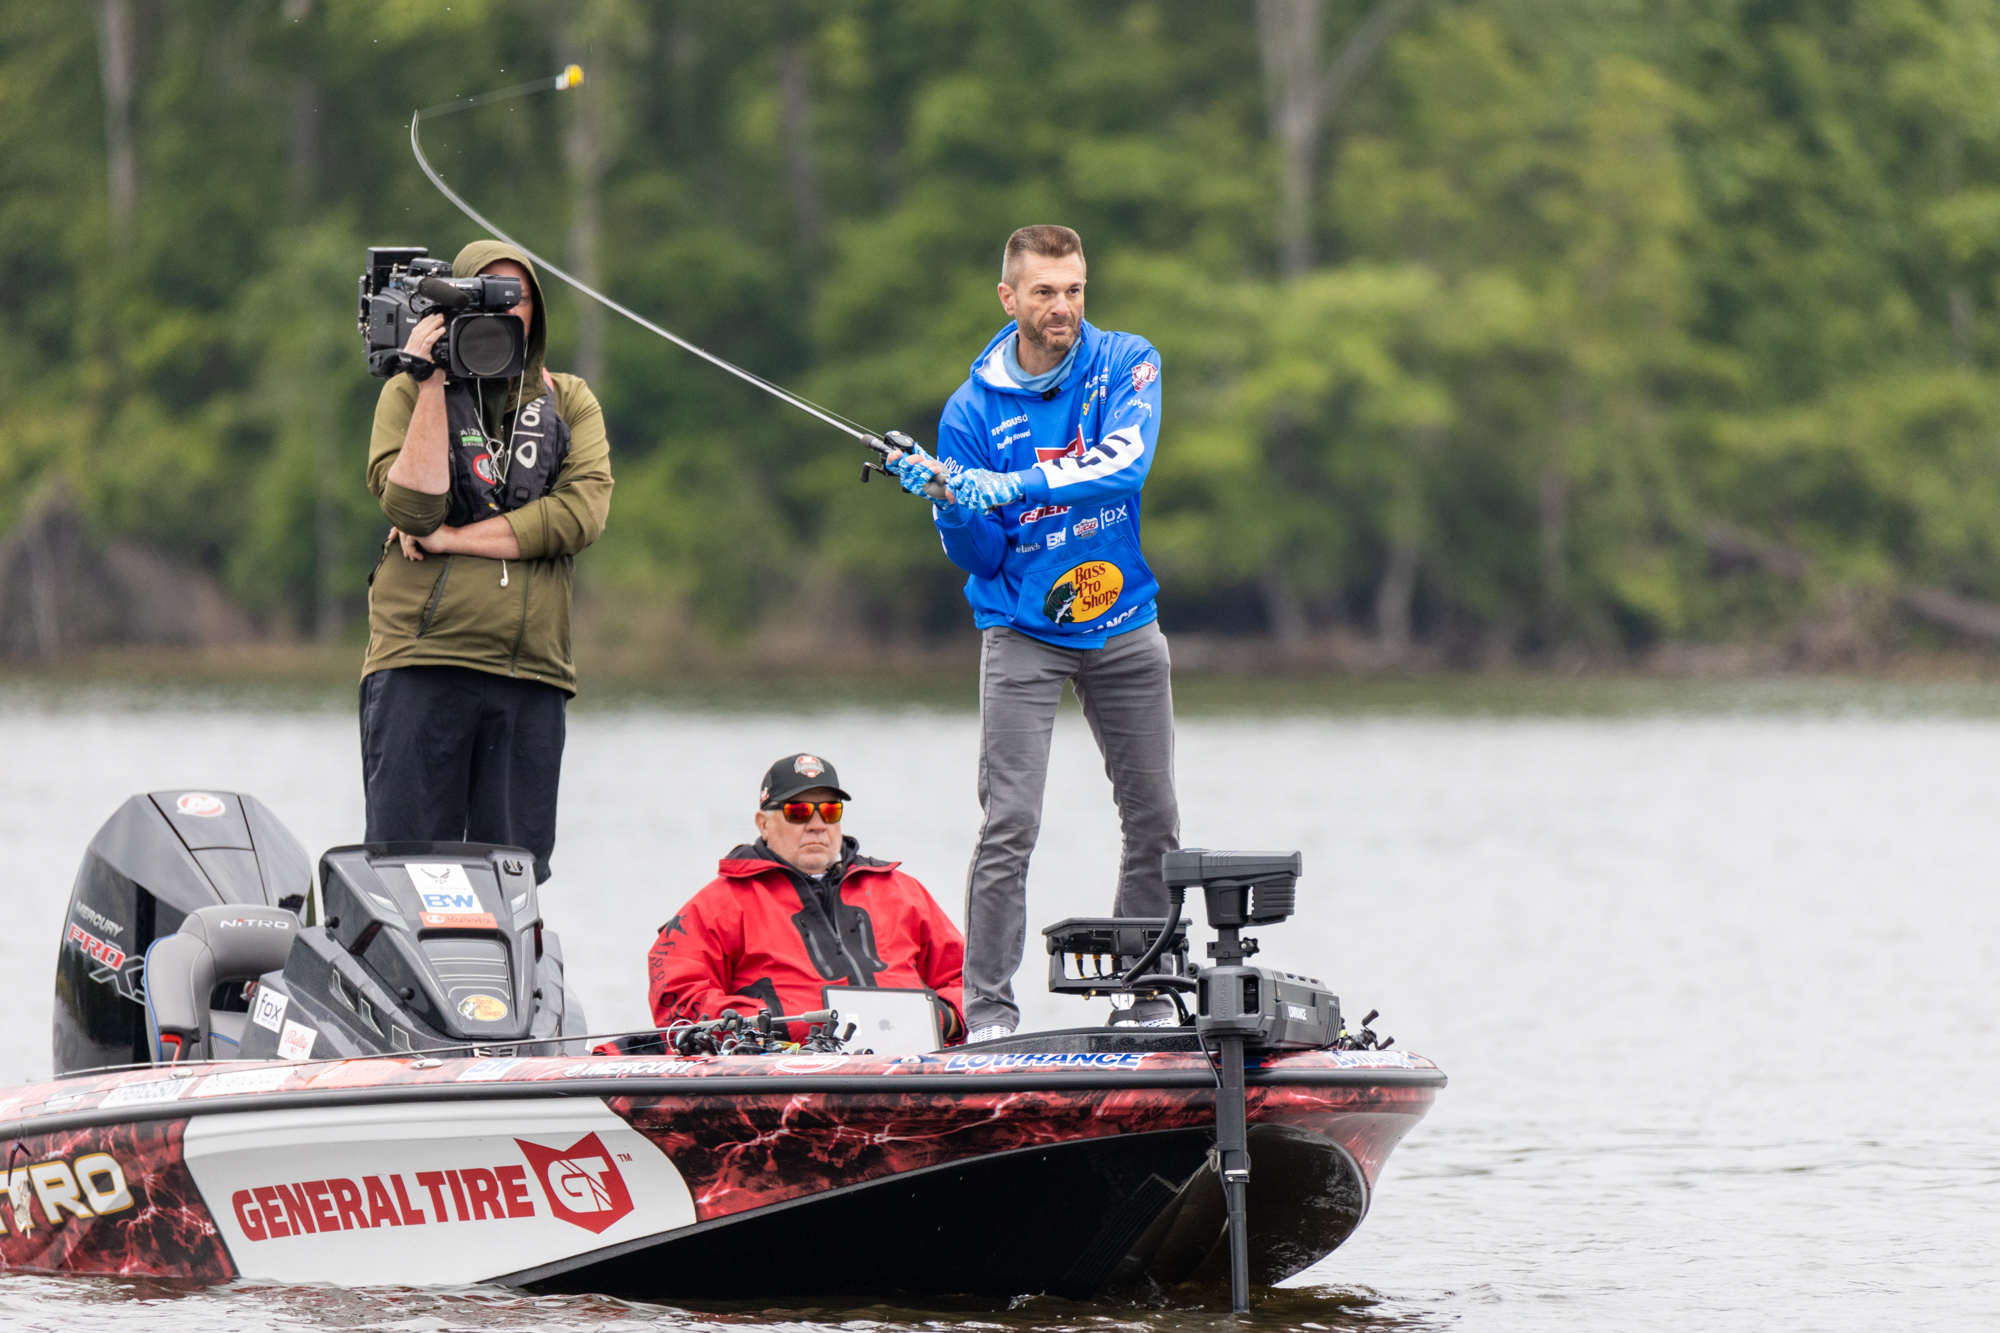 GALLERY The search for big bass is on at Caney Creek Major League Fishing